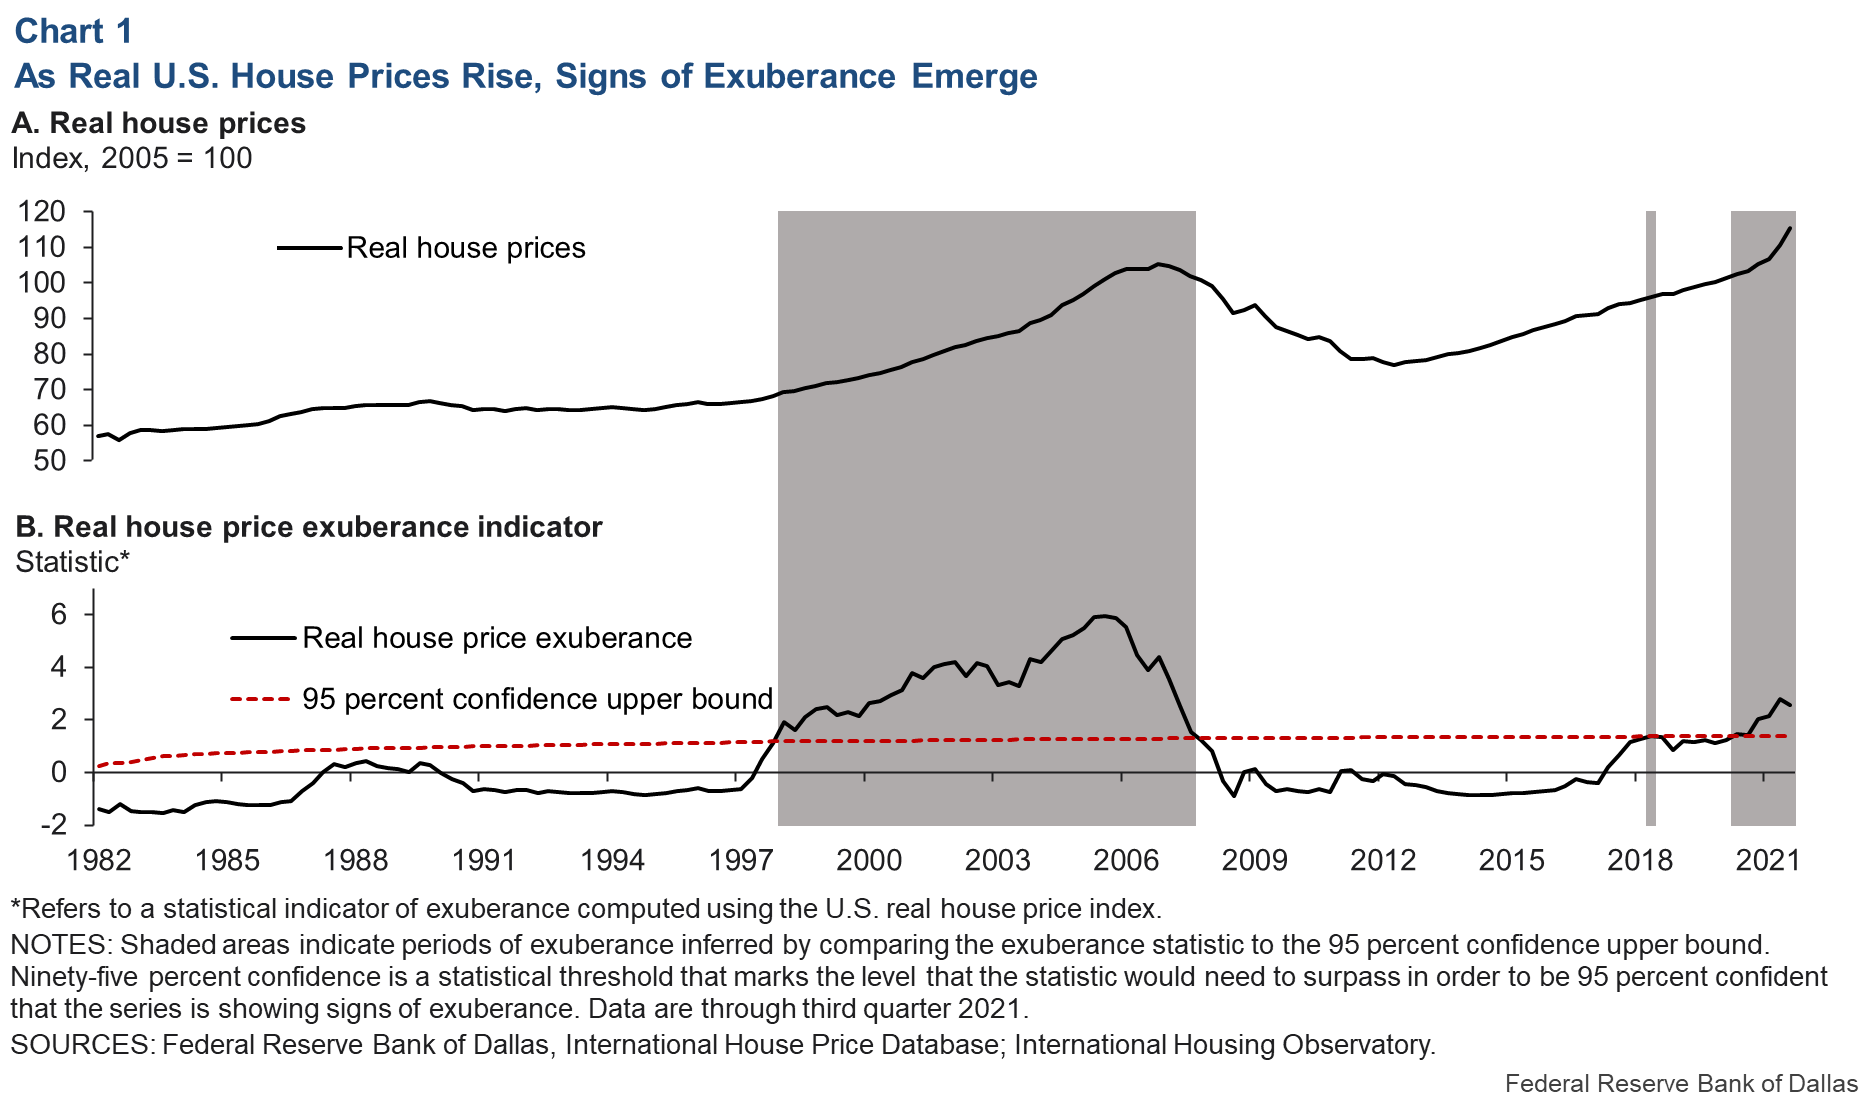 Chart 1: As Real U.S. House Prices Rise, Signs of Exuberance Emerge